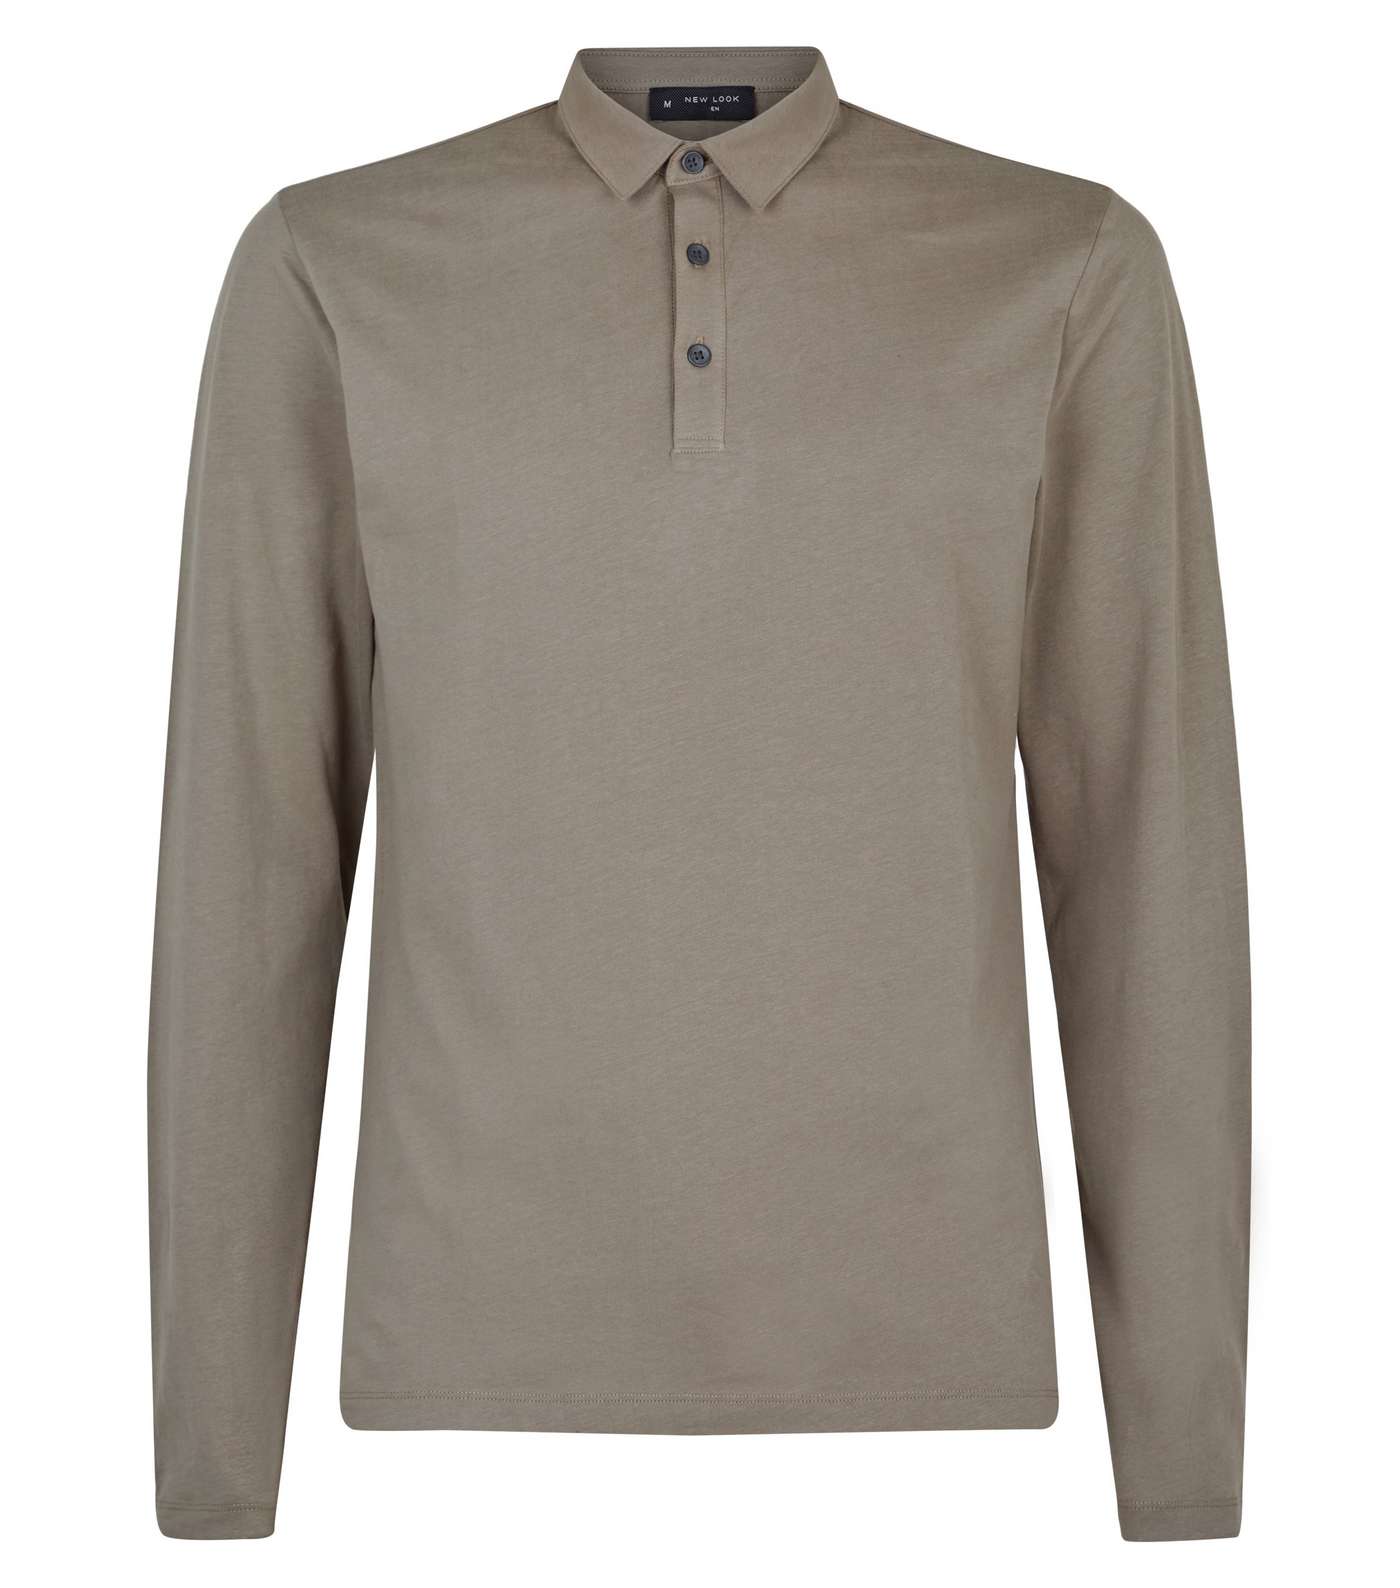 Olive Muscle Fit Long Sleeve Polo Shirt Image 4